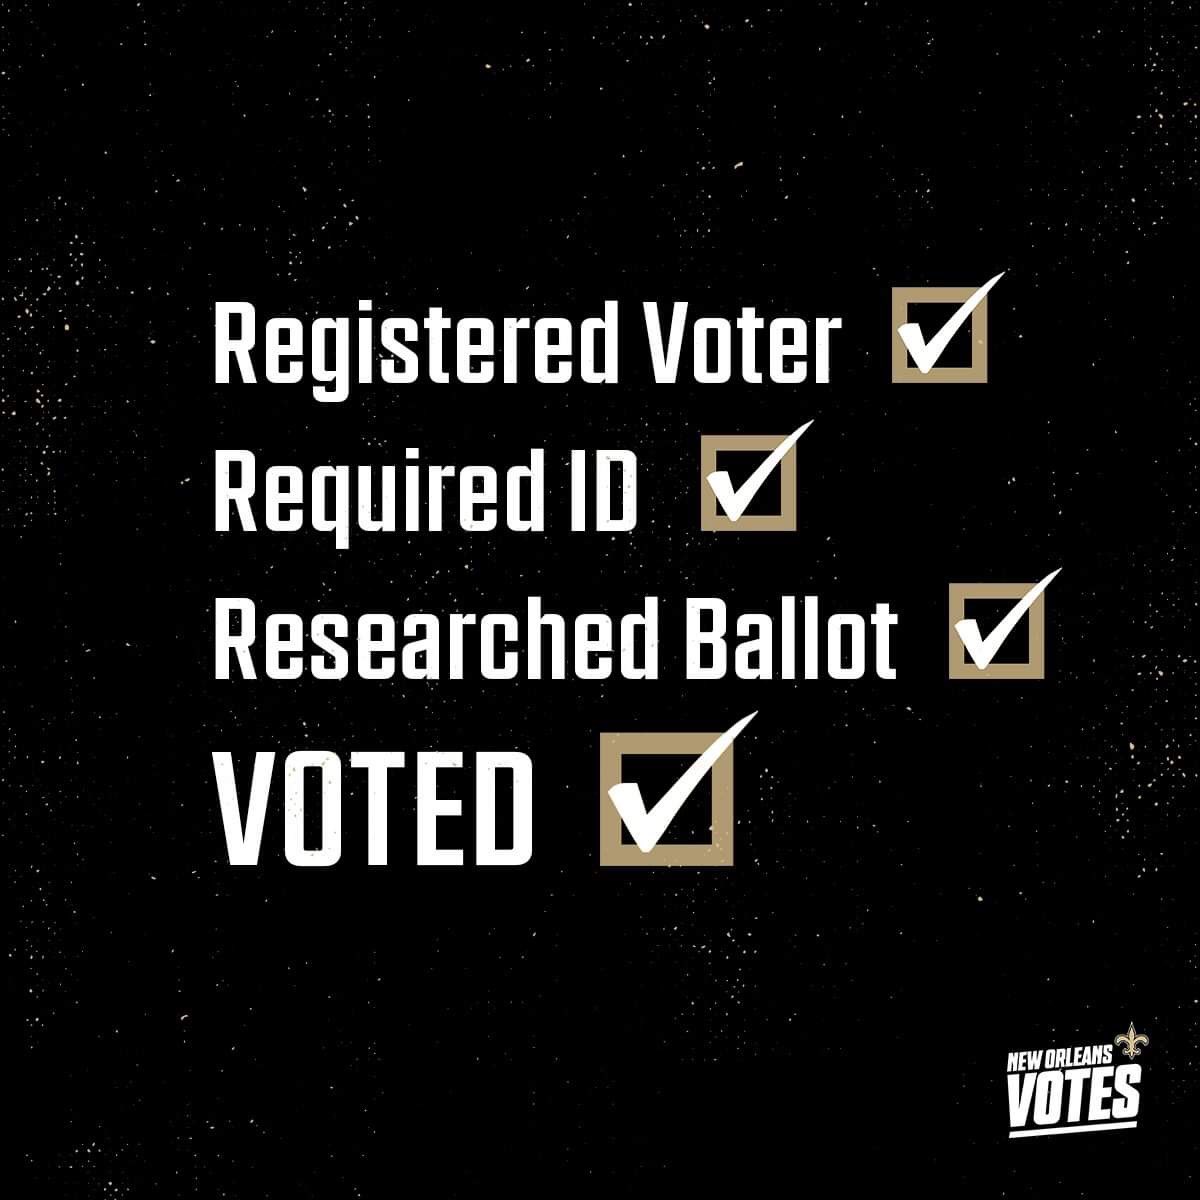 Make your voice heard #NFLVotes